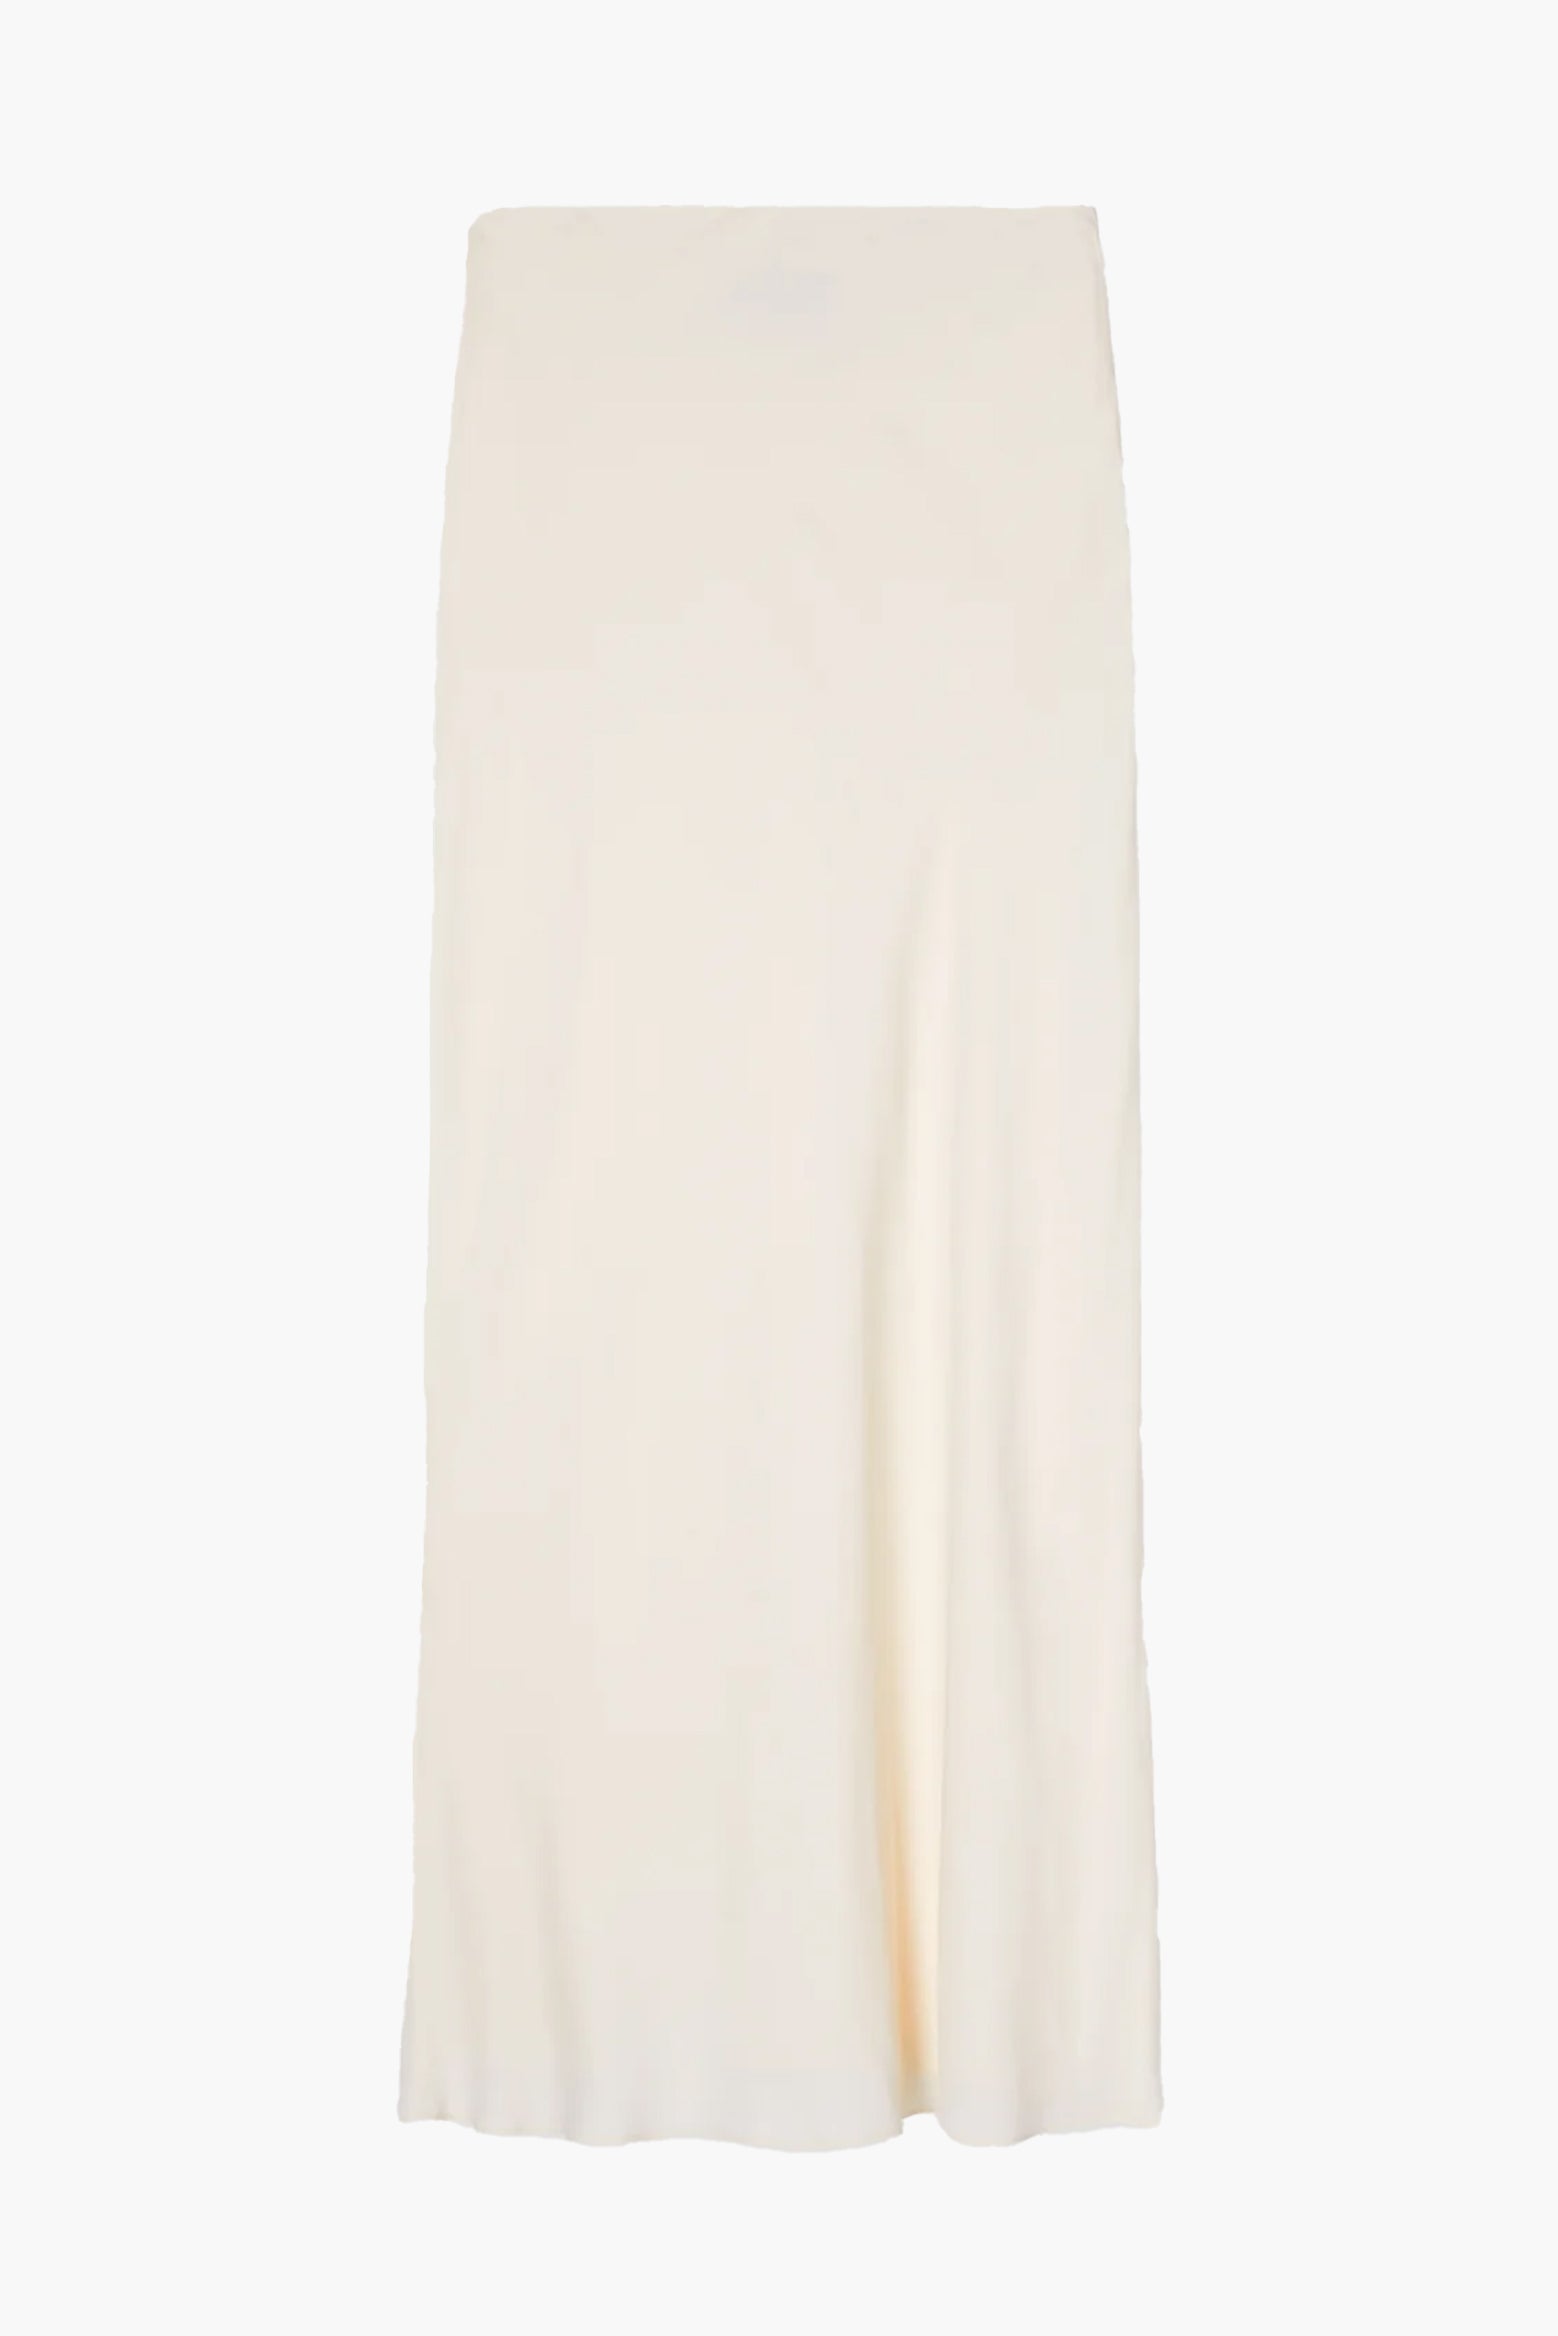 Rohe Long Satin Skirt in Cream available at The New Trend Australia. 